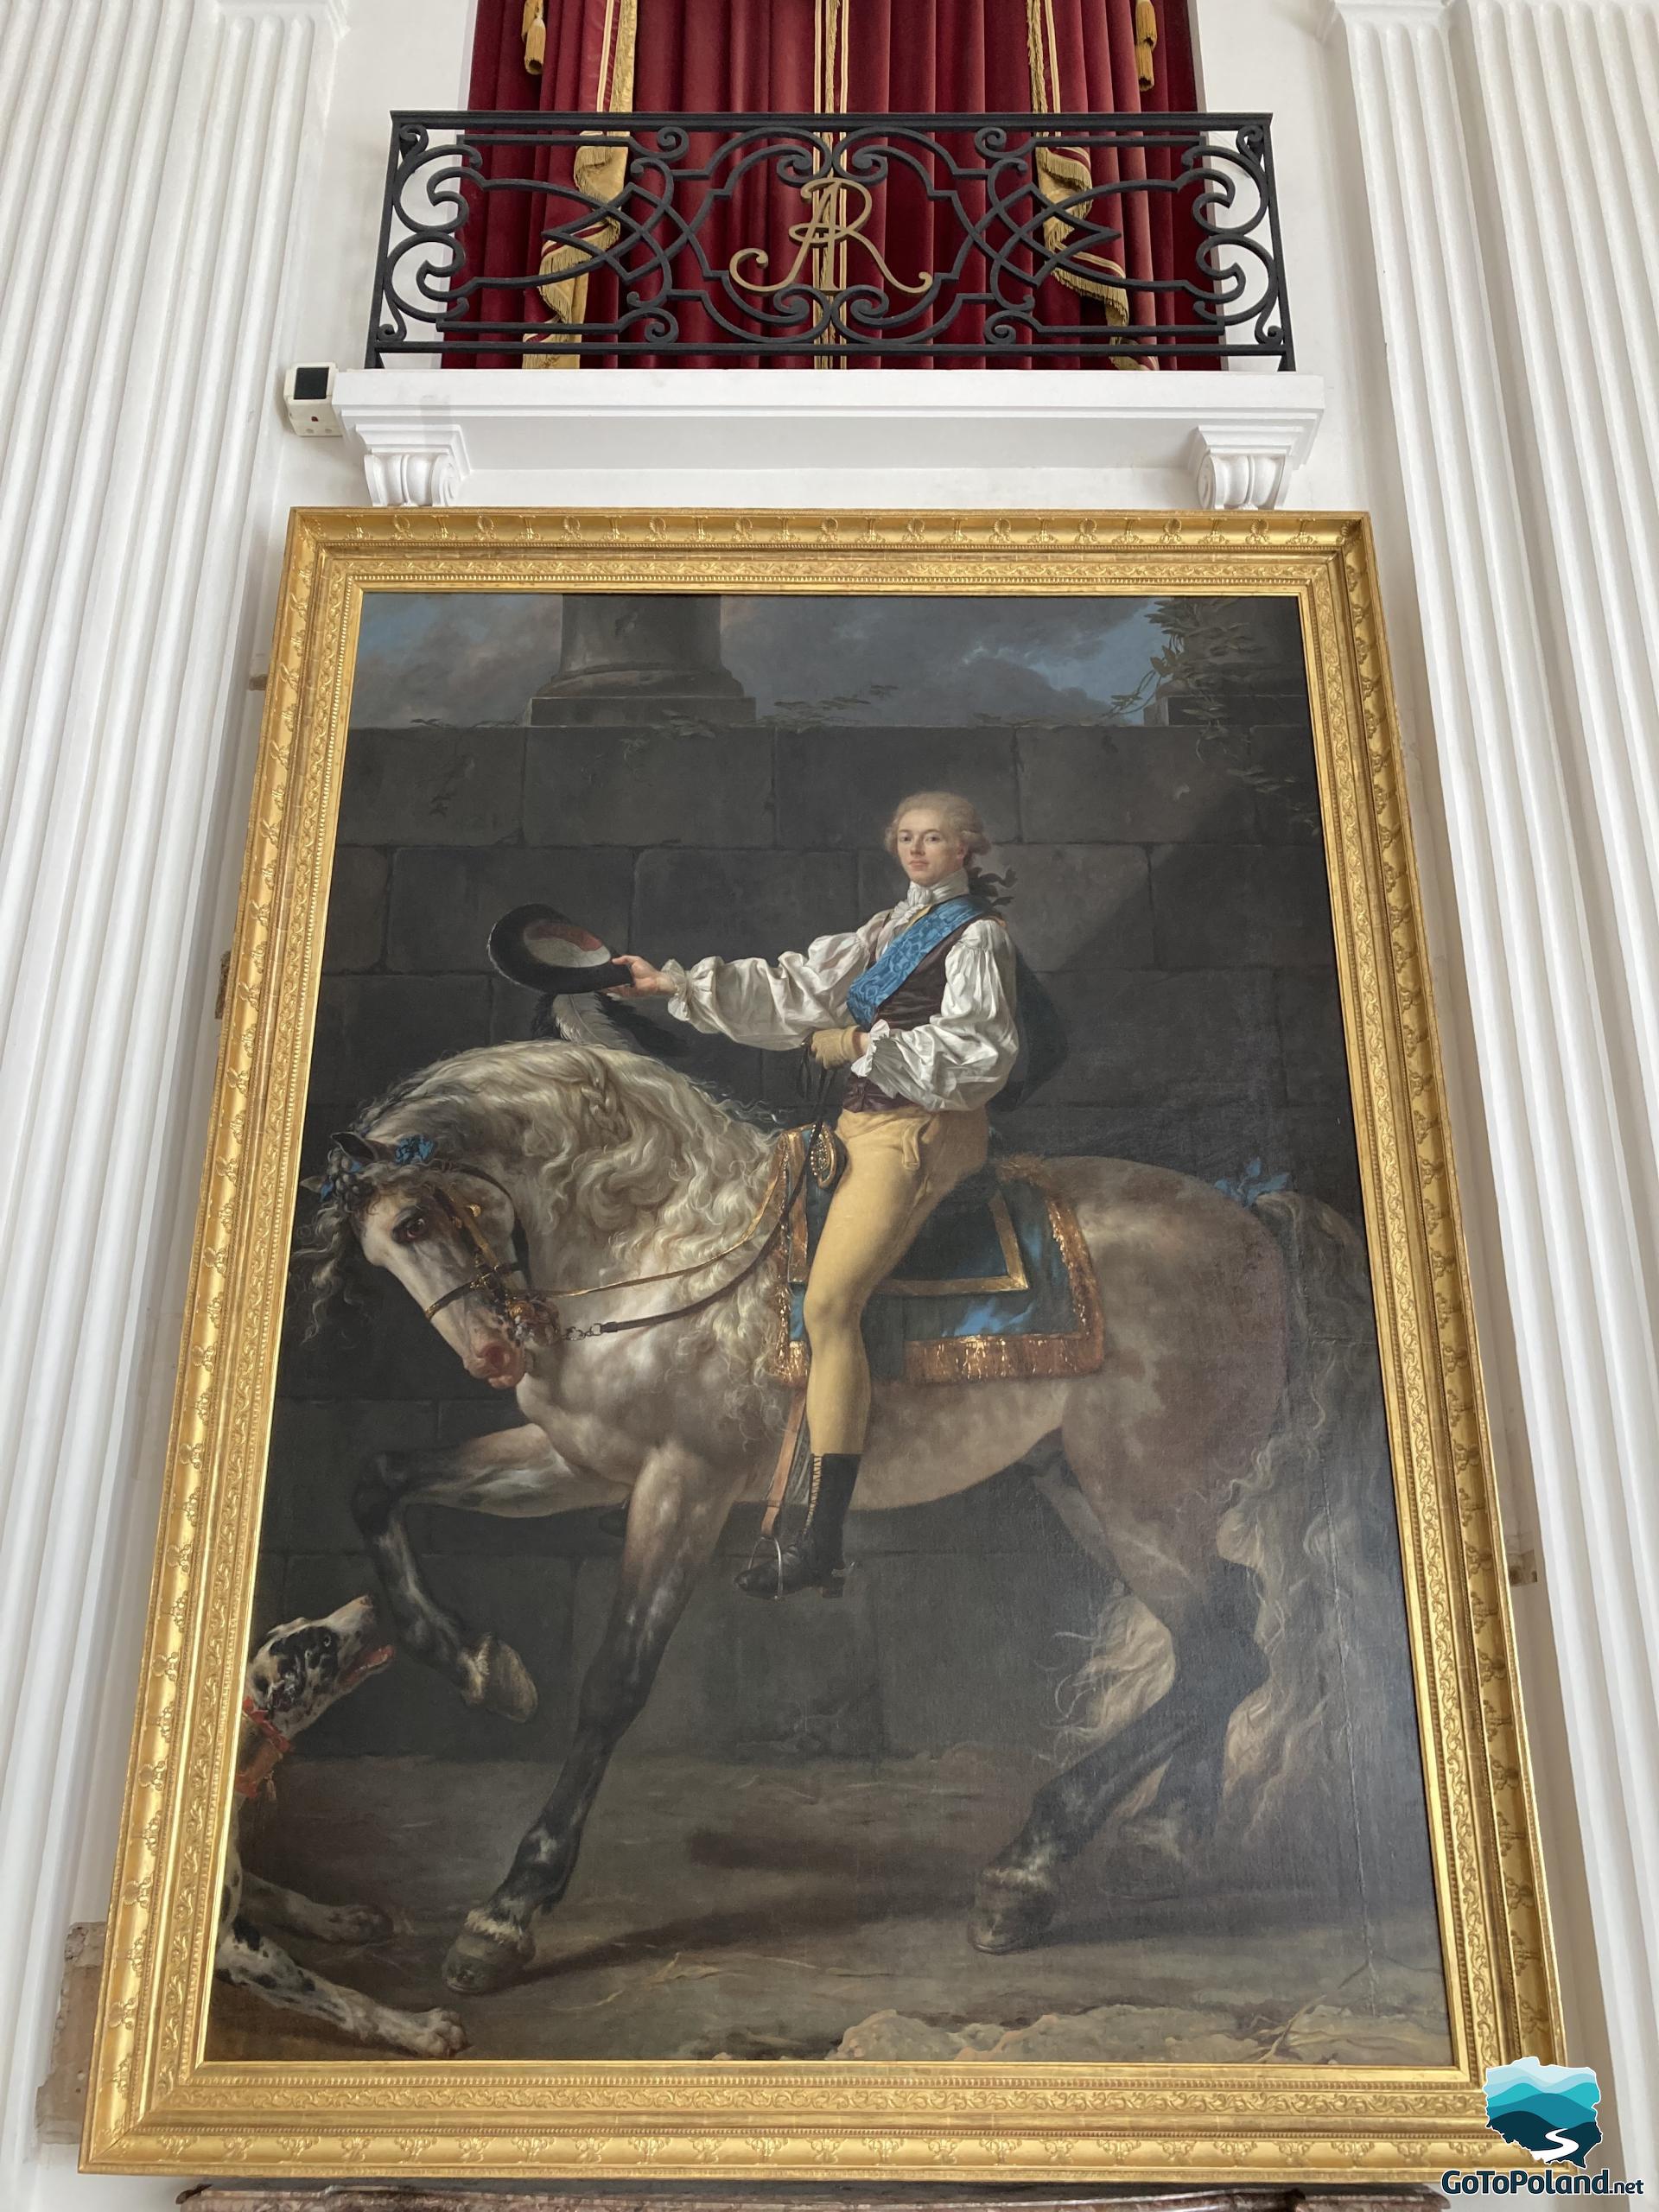 a large painting of a rider on a horse in a golden frame